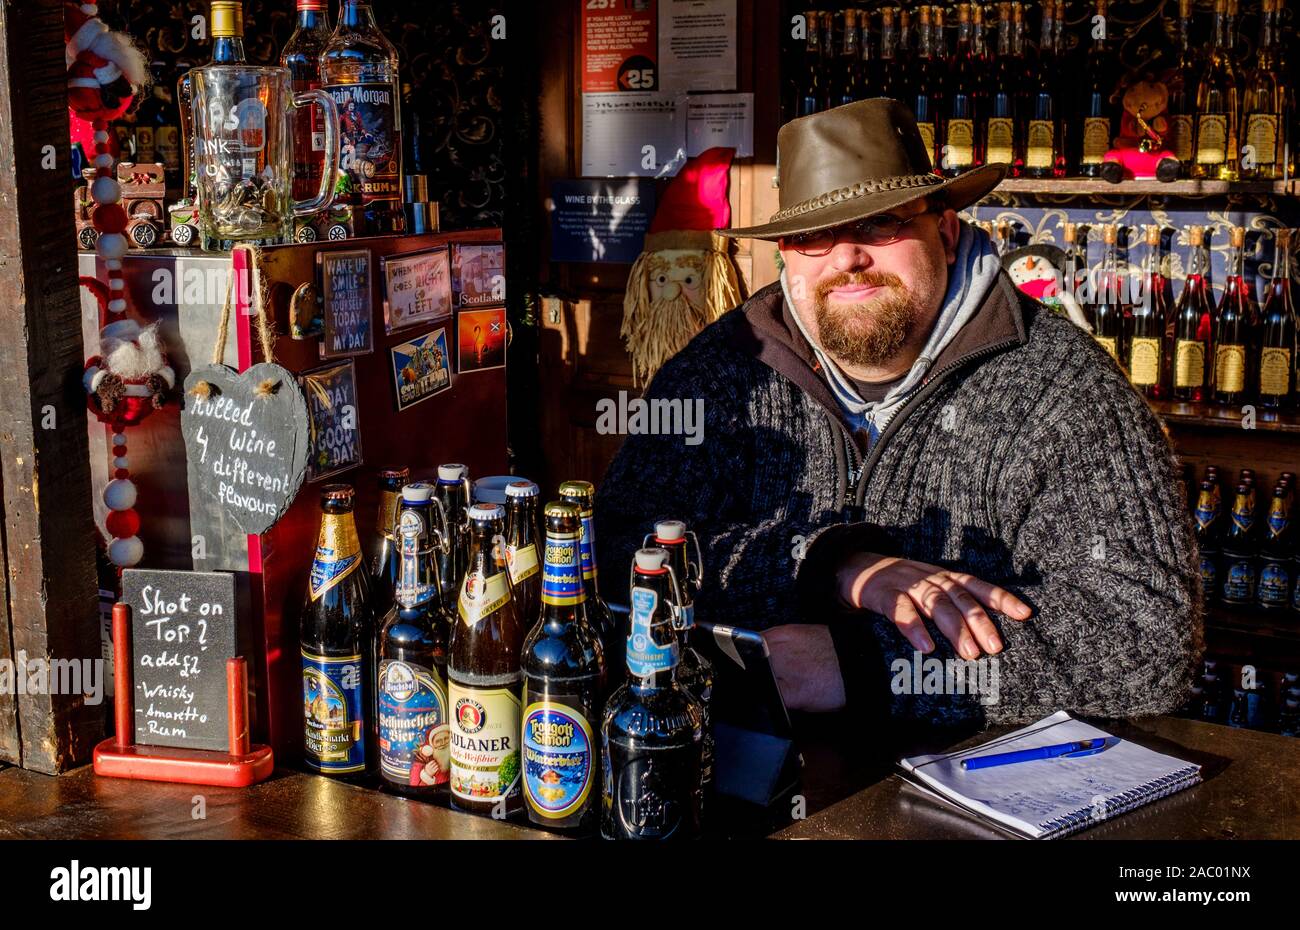 Edinburgh's Christmas 2019: A stall holder in Princes Street Gardens waiting on customers for his beer. Stock Photo